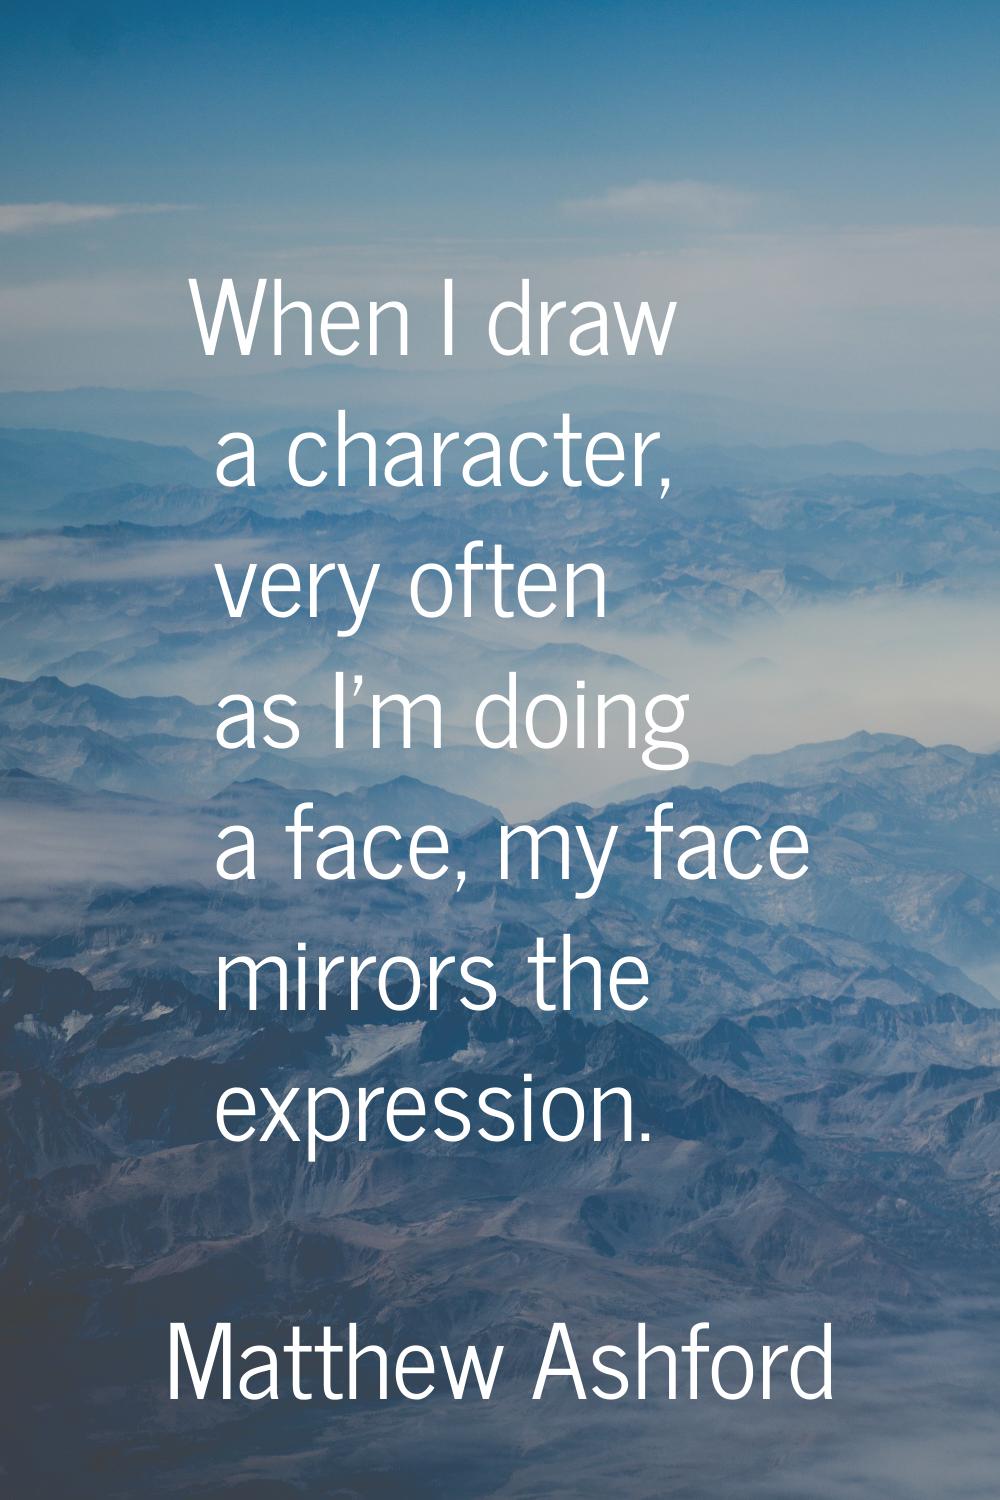 When I draw a character, very often as I'm doing a face, my face mirrors the expression.